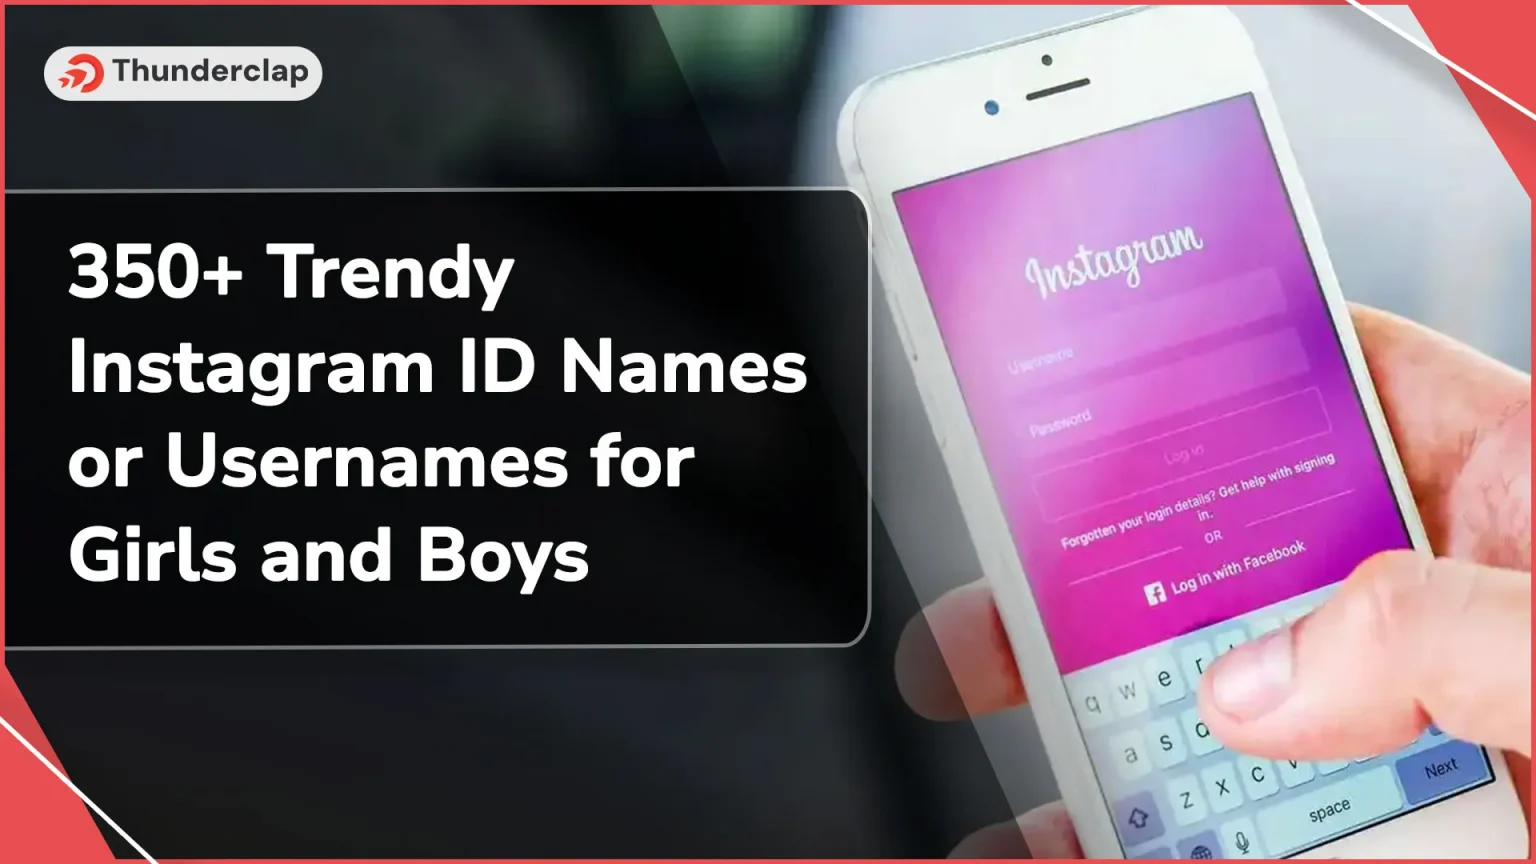 Trendy Instagram ID Names or Usernames for Girls and Boys